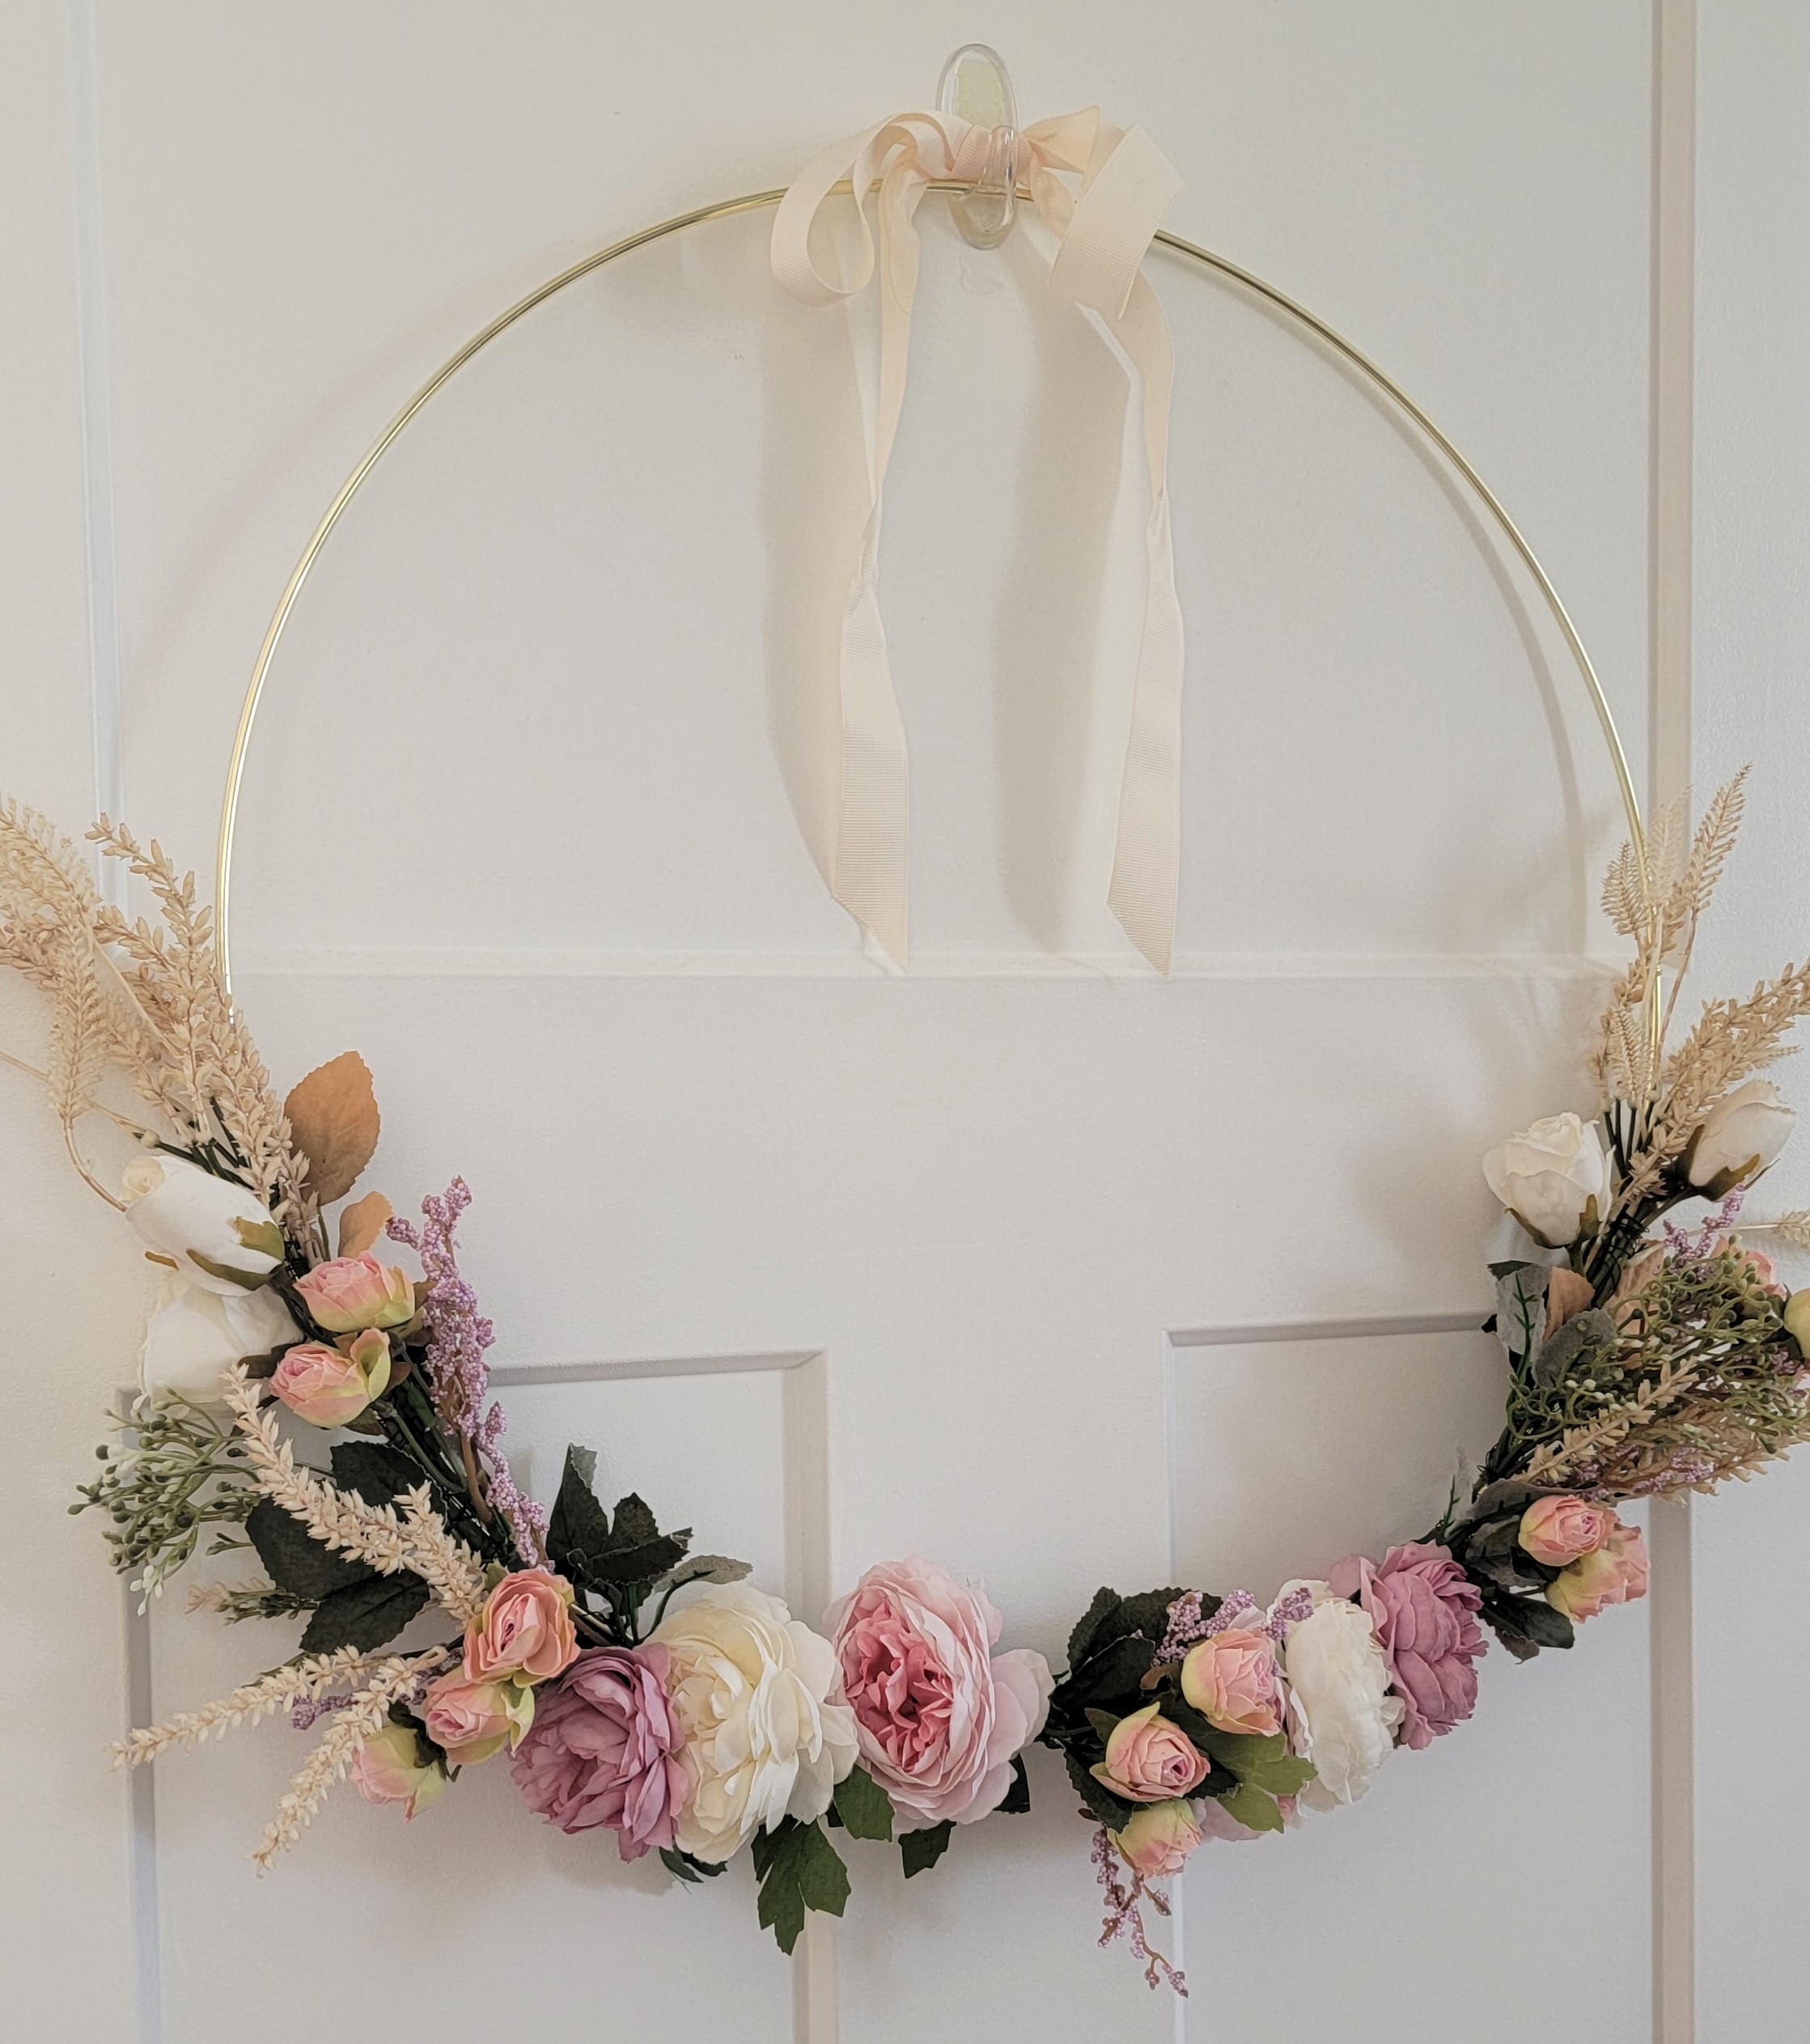 Completed DIY Floral Hoop Wreath with an extra simple ribbon over the hook